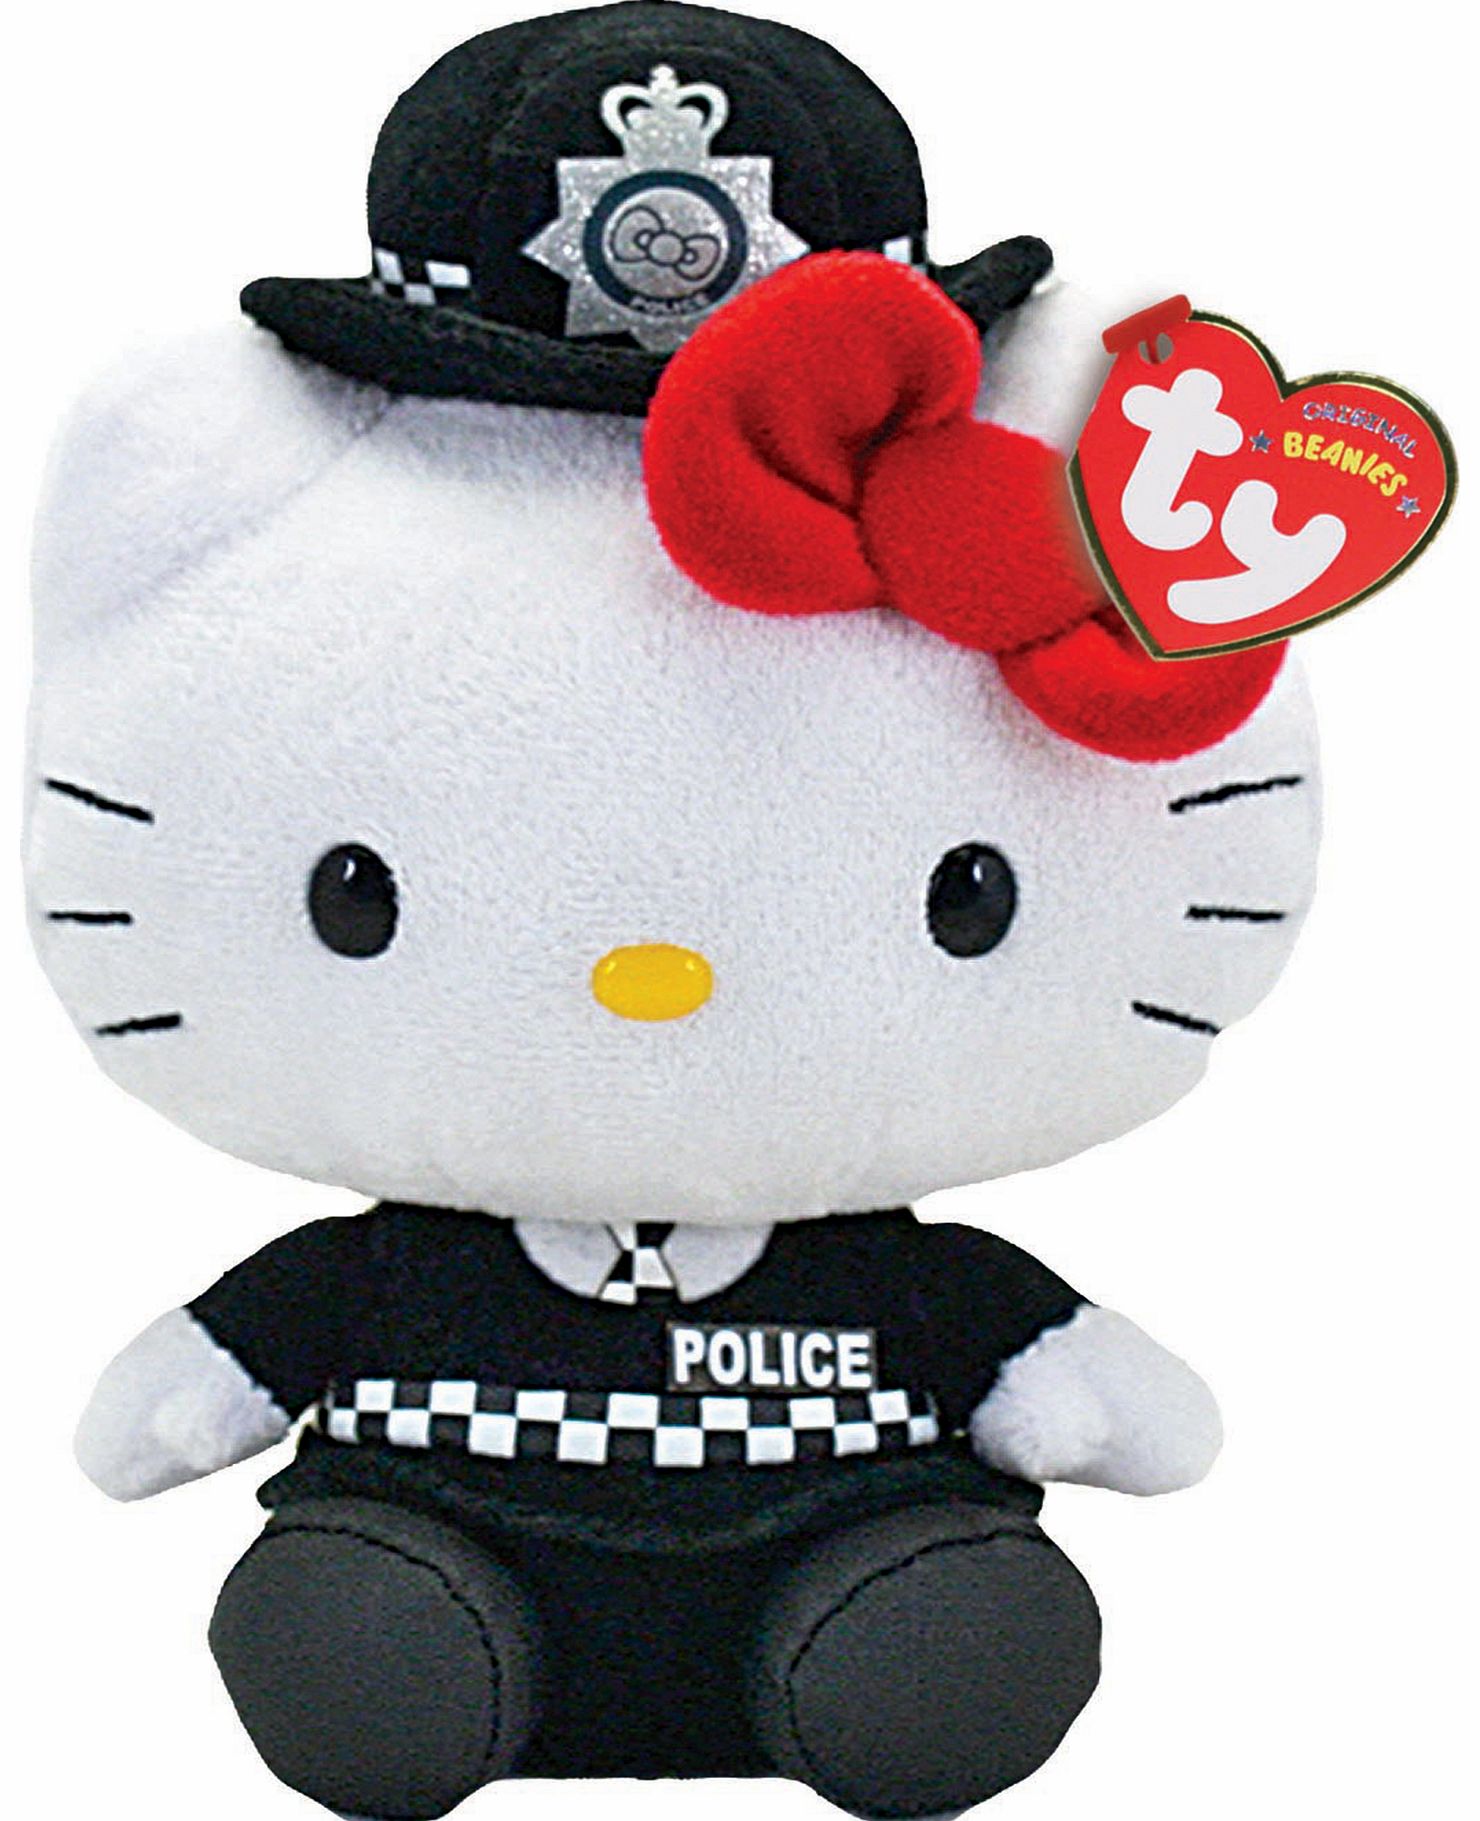 TY Hello Kitty Police Officer Beanie